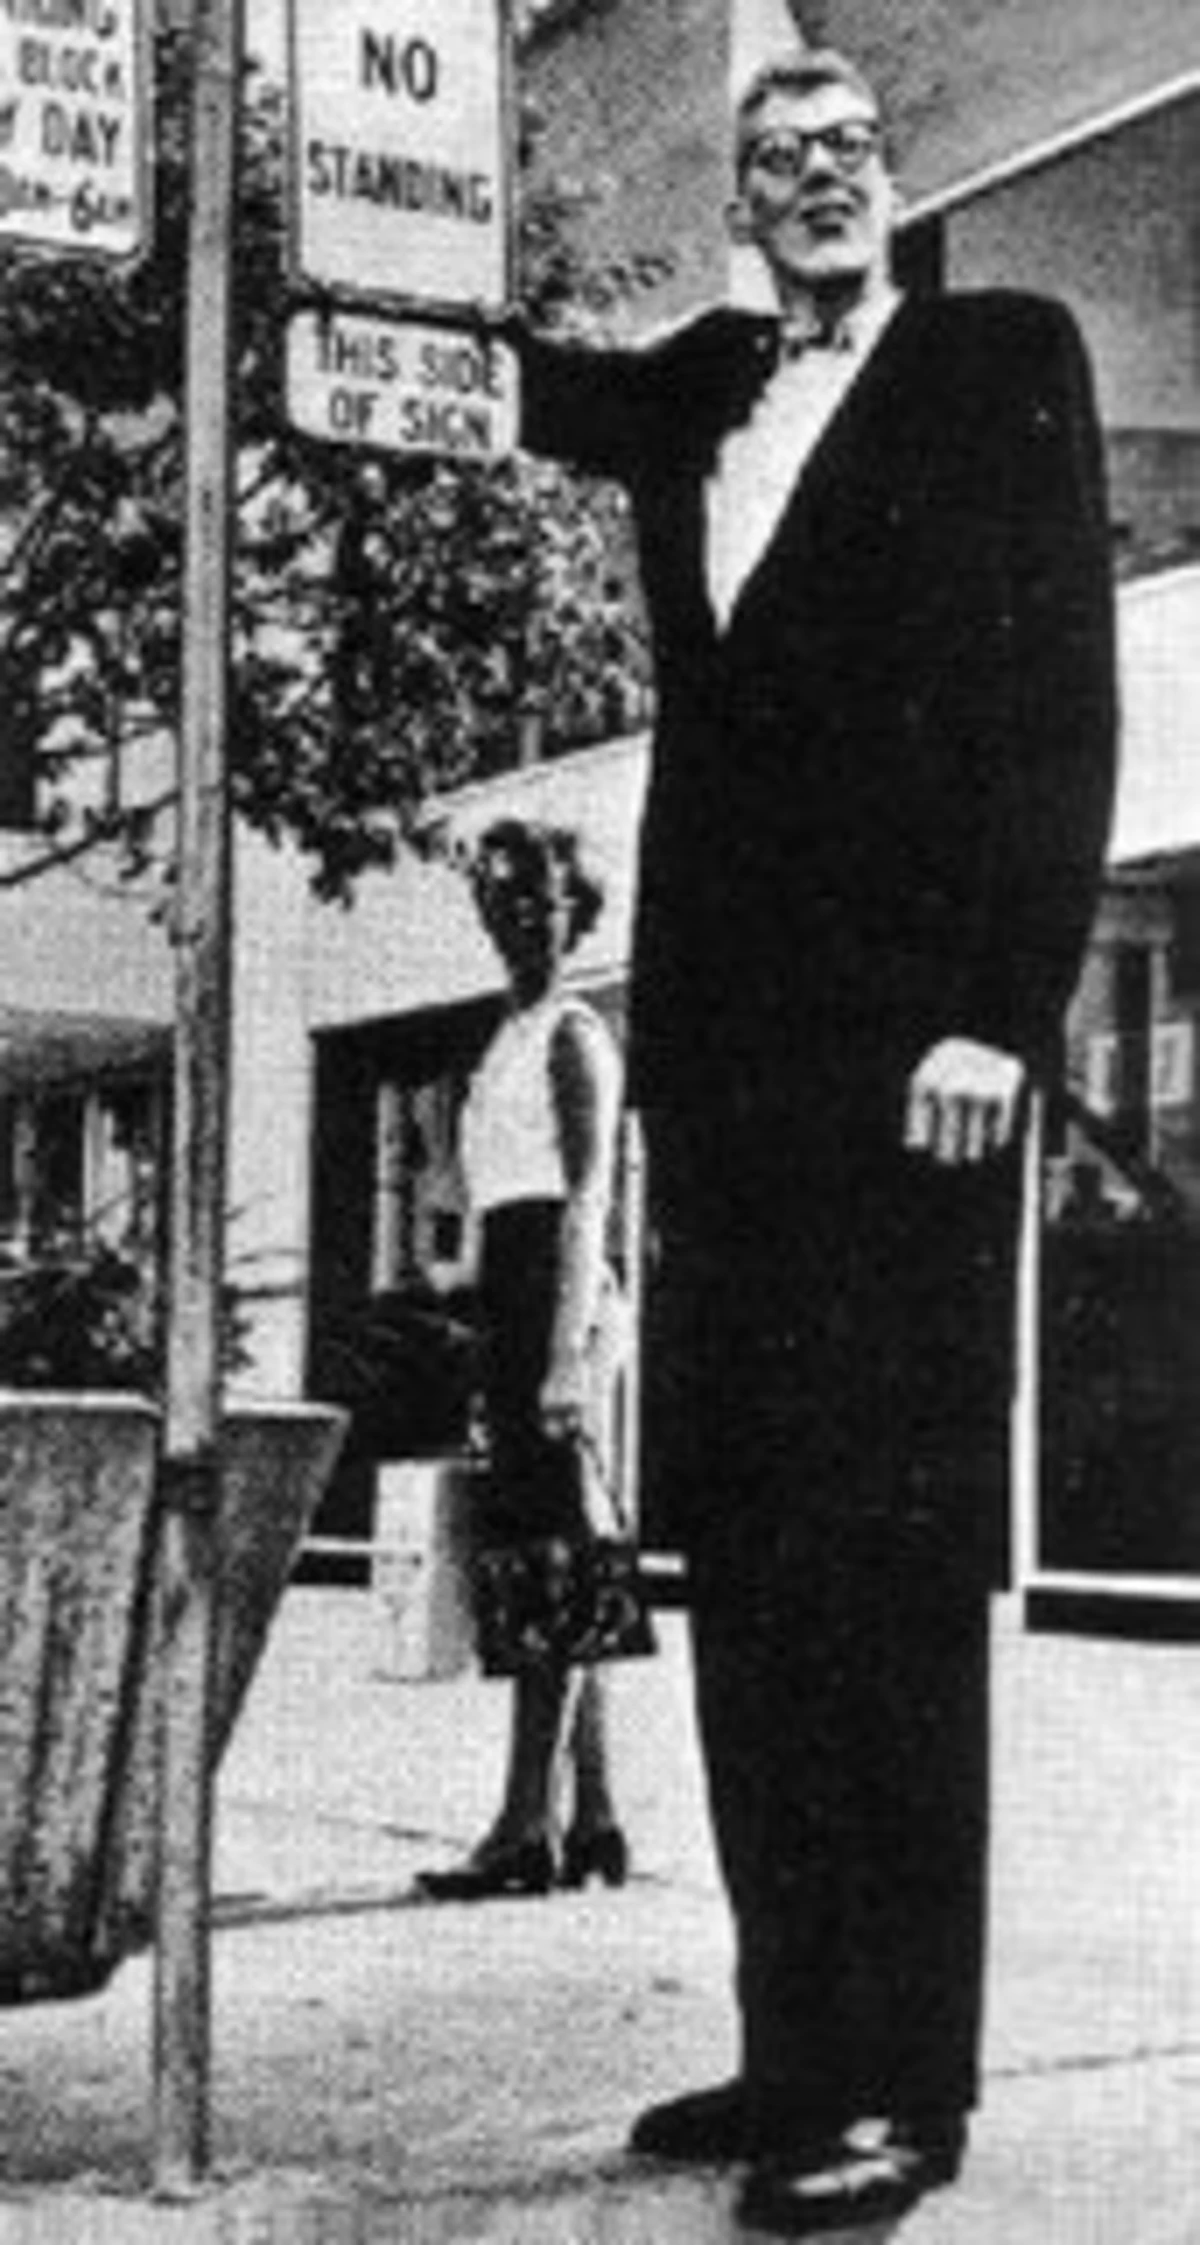 Robert Wadlow was the tallest recorded person measuring at 8'11.1